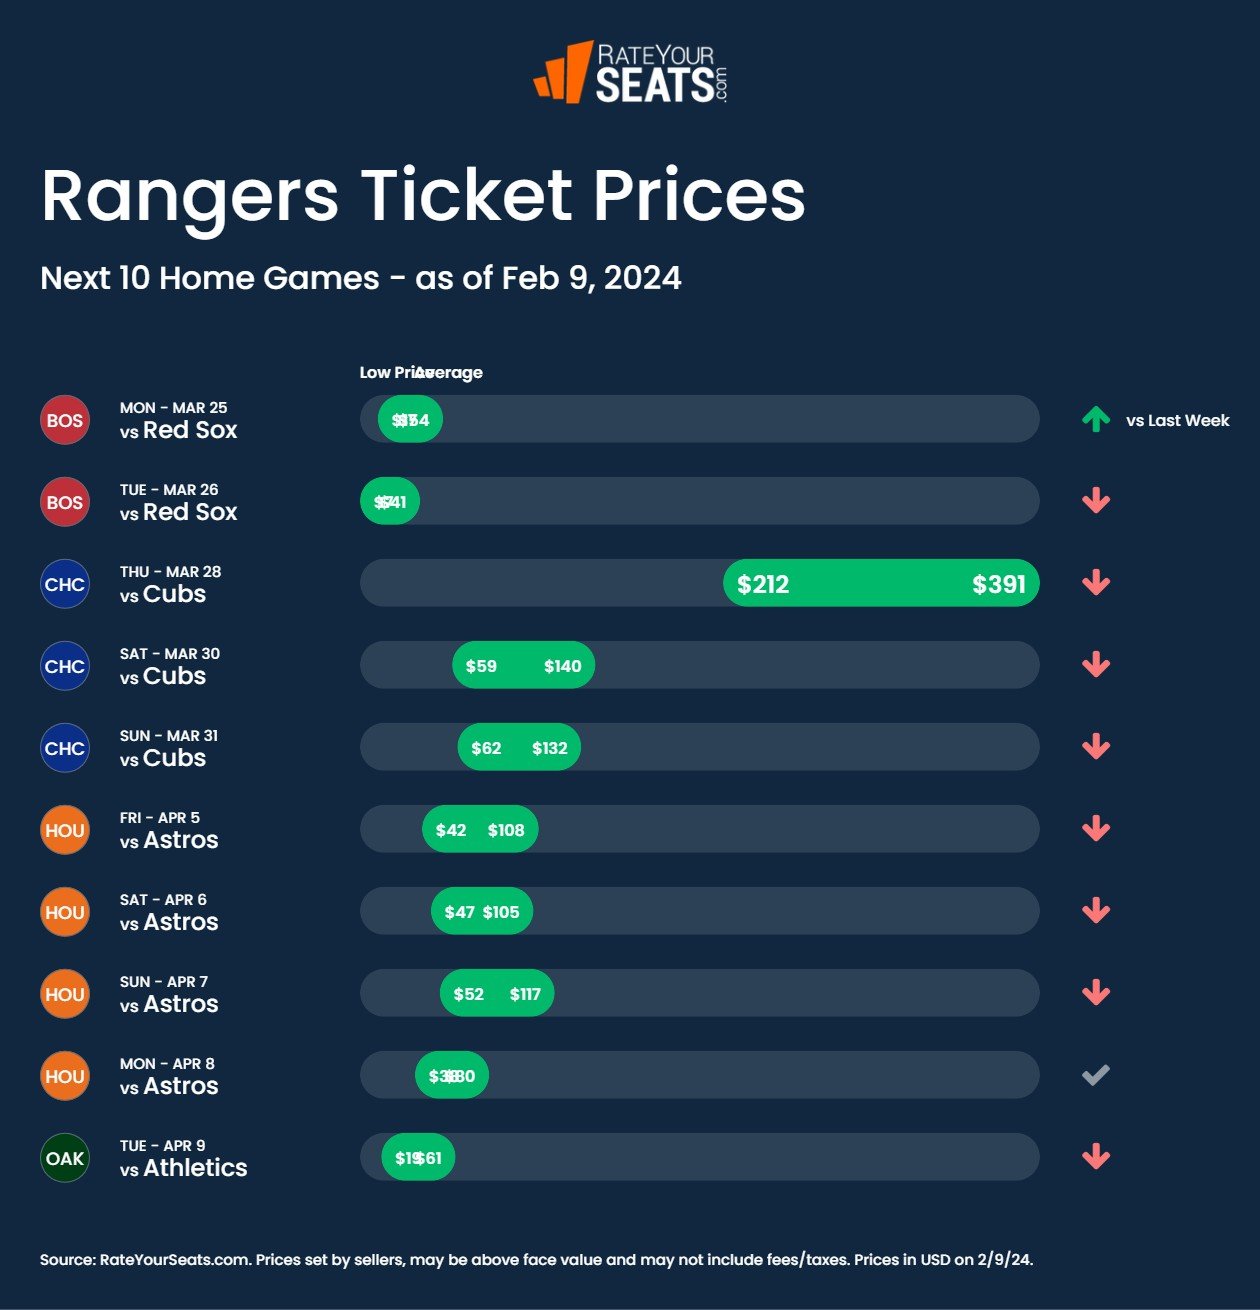 Rangers tickets pricing week of February 9 2024